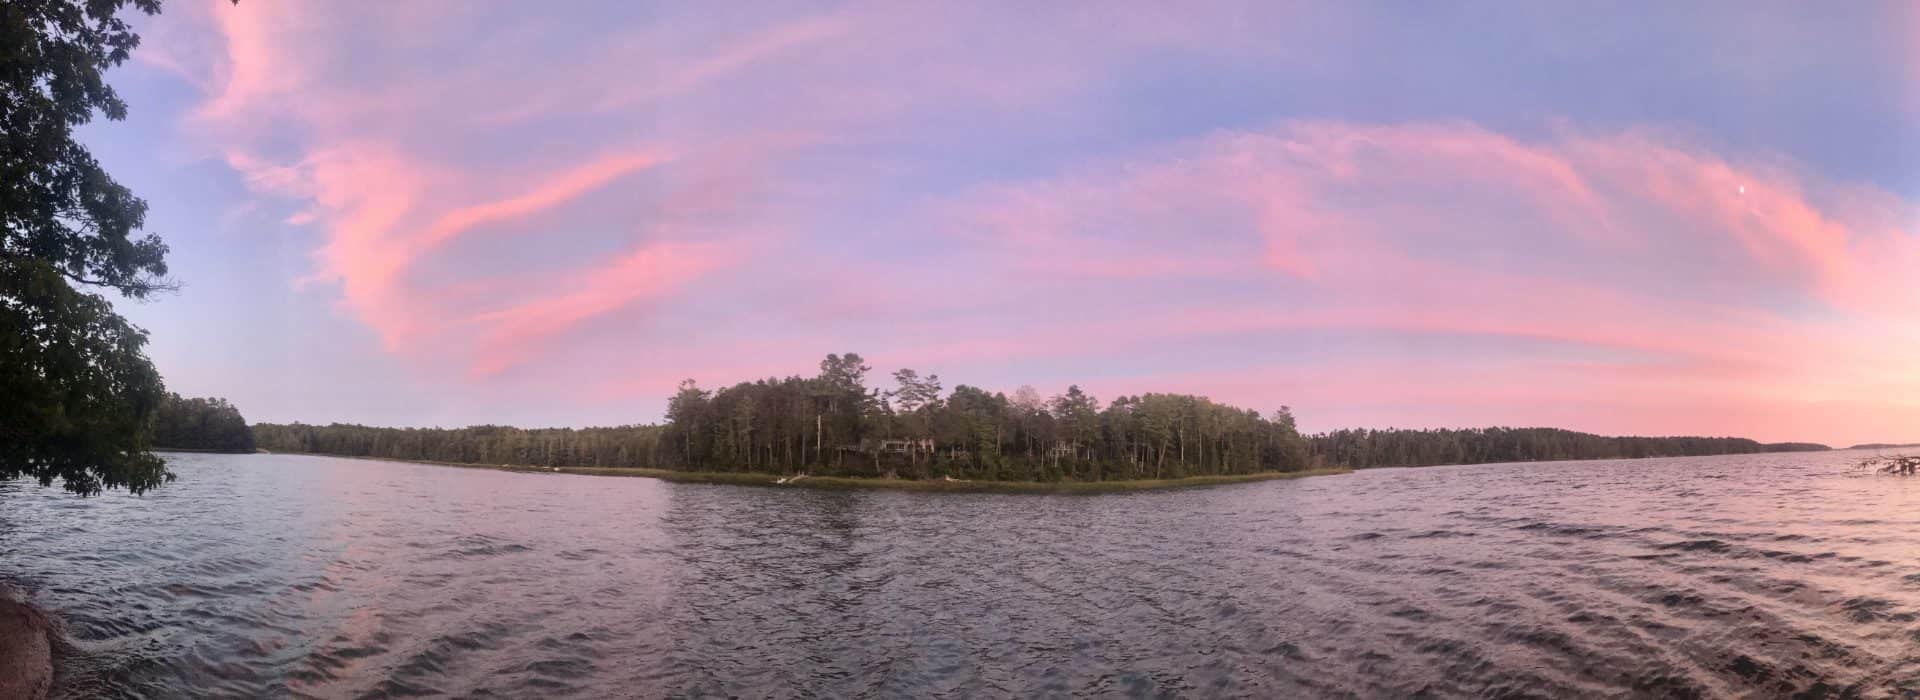 View of mostly calm water with island of trees in the background at dusk